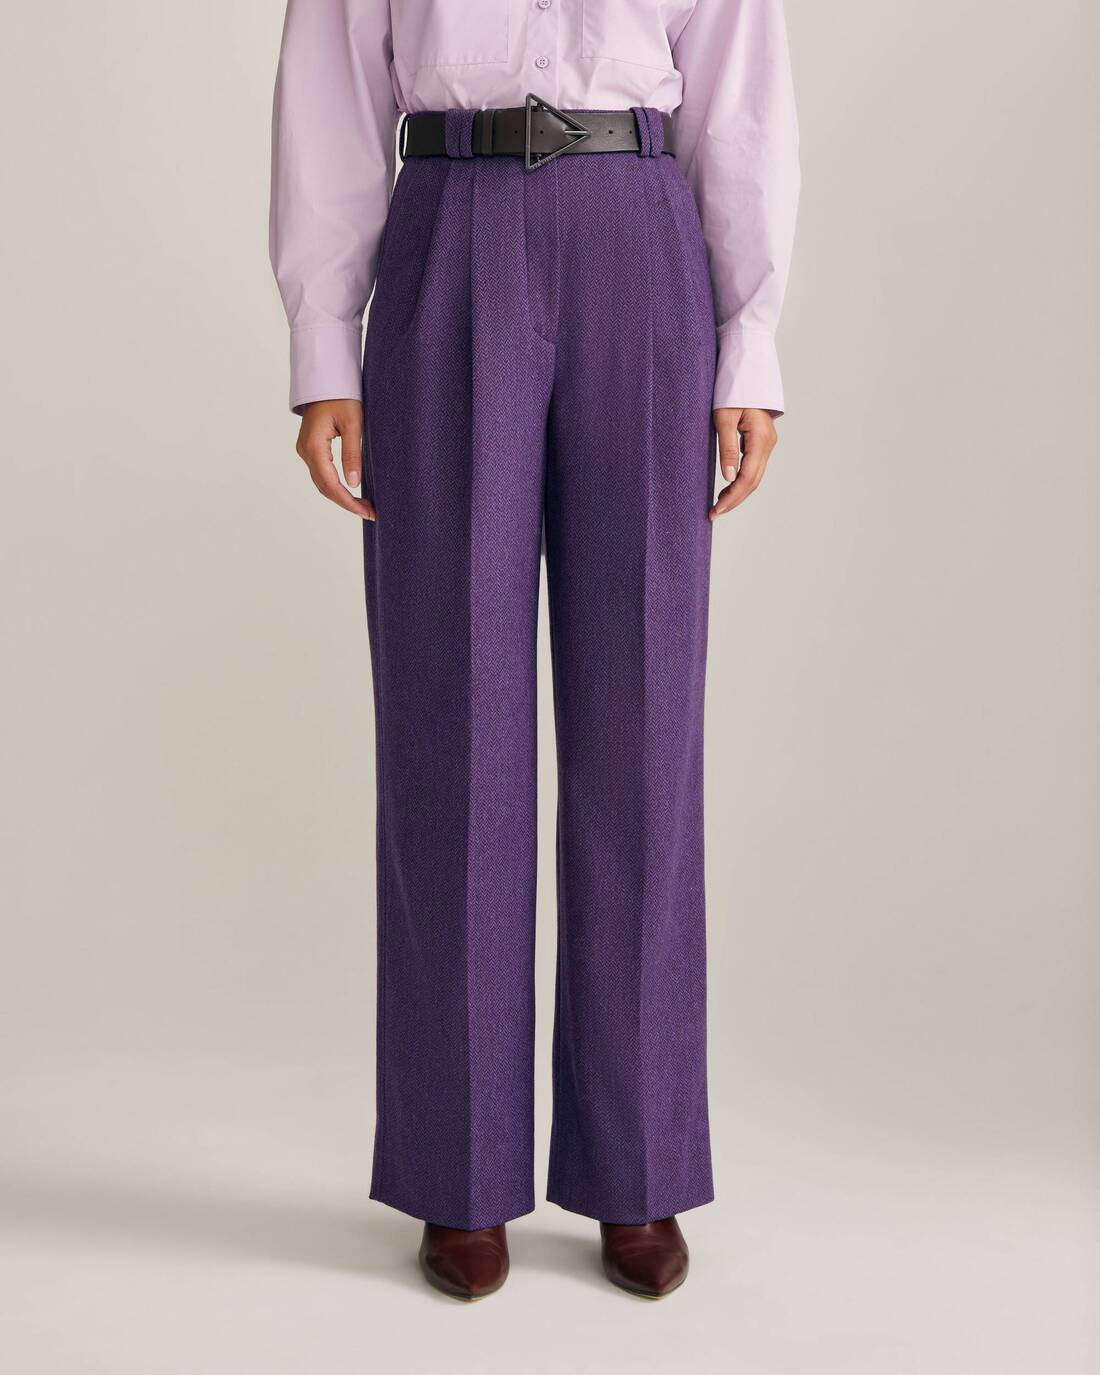 Tweed palazzo trousers with contrast stitching